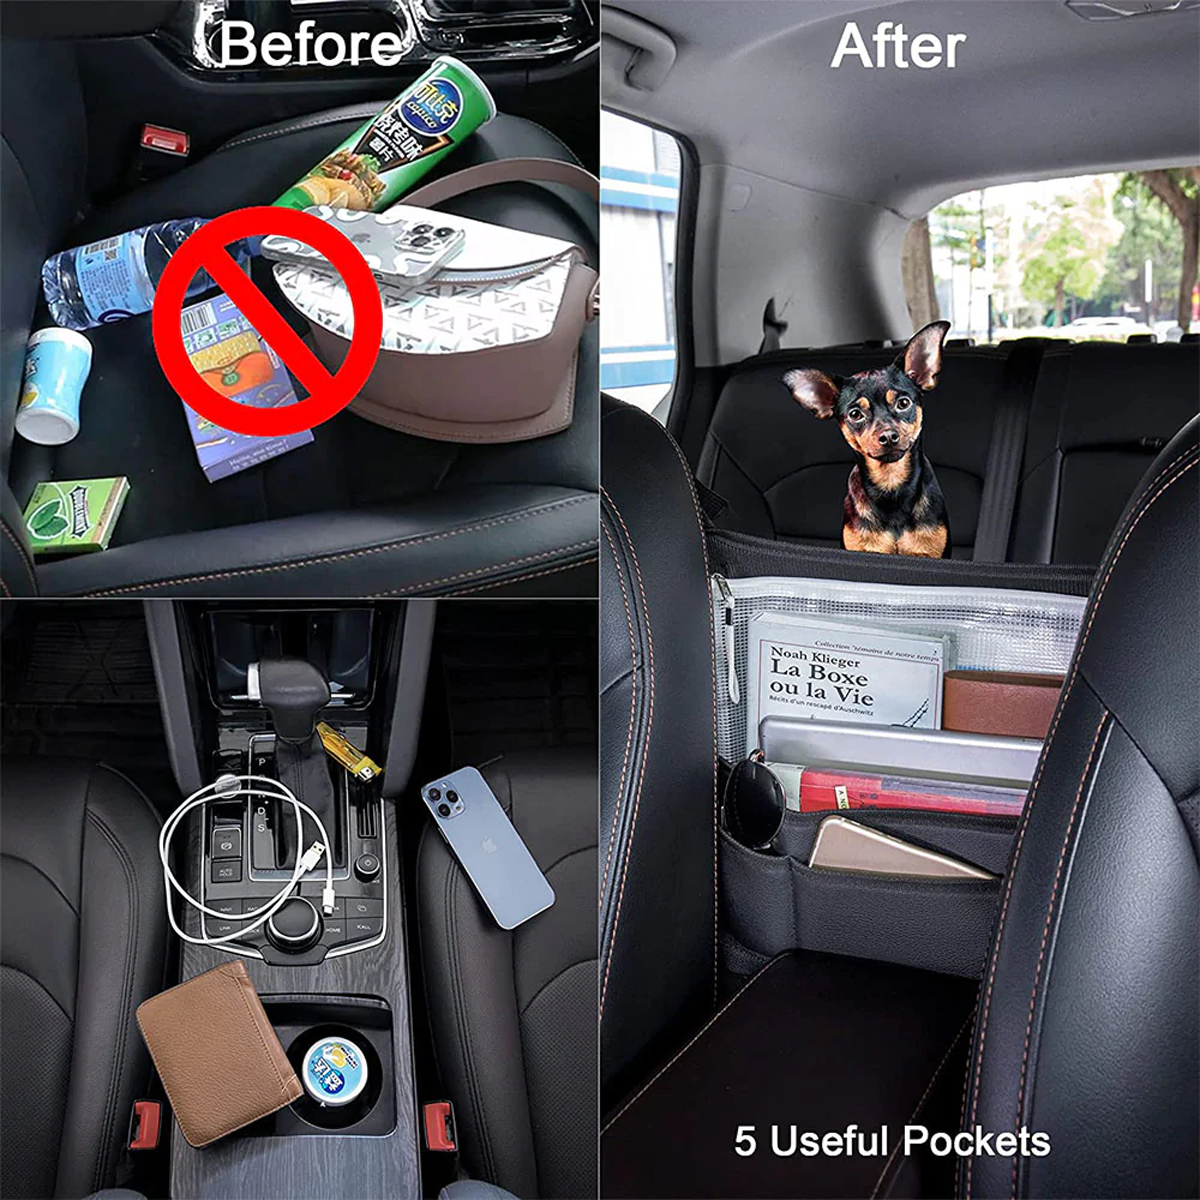 Custom Text For Car Purse Holder for Car Handbag Holder Between Seats Premium PU Leather, Compatible with All Cars, Auto Driver Or Passenger Accessories Organizer, Hanging Car Purse Storage Pocket Back Seat Pet Barrier VE11991